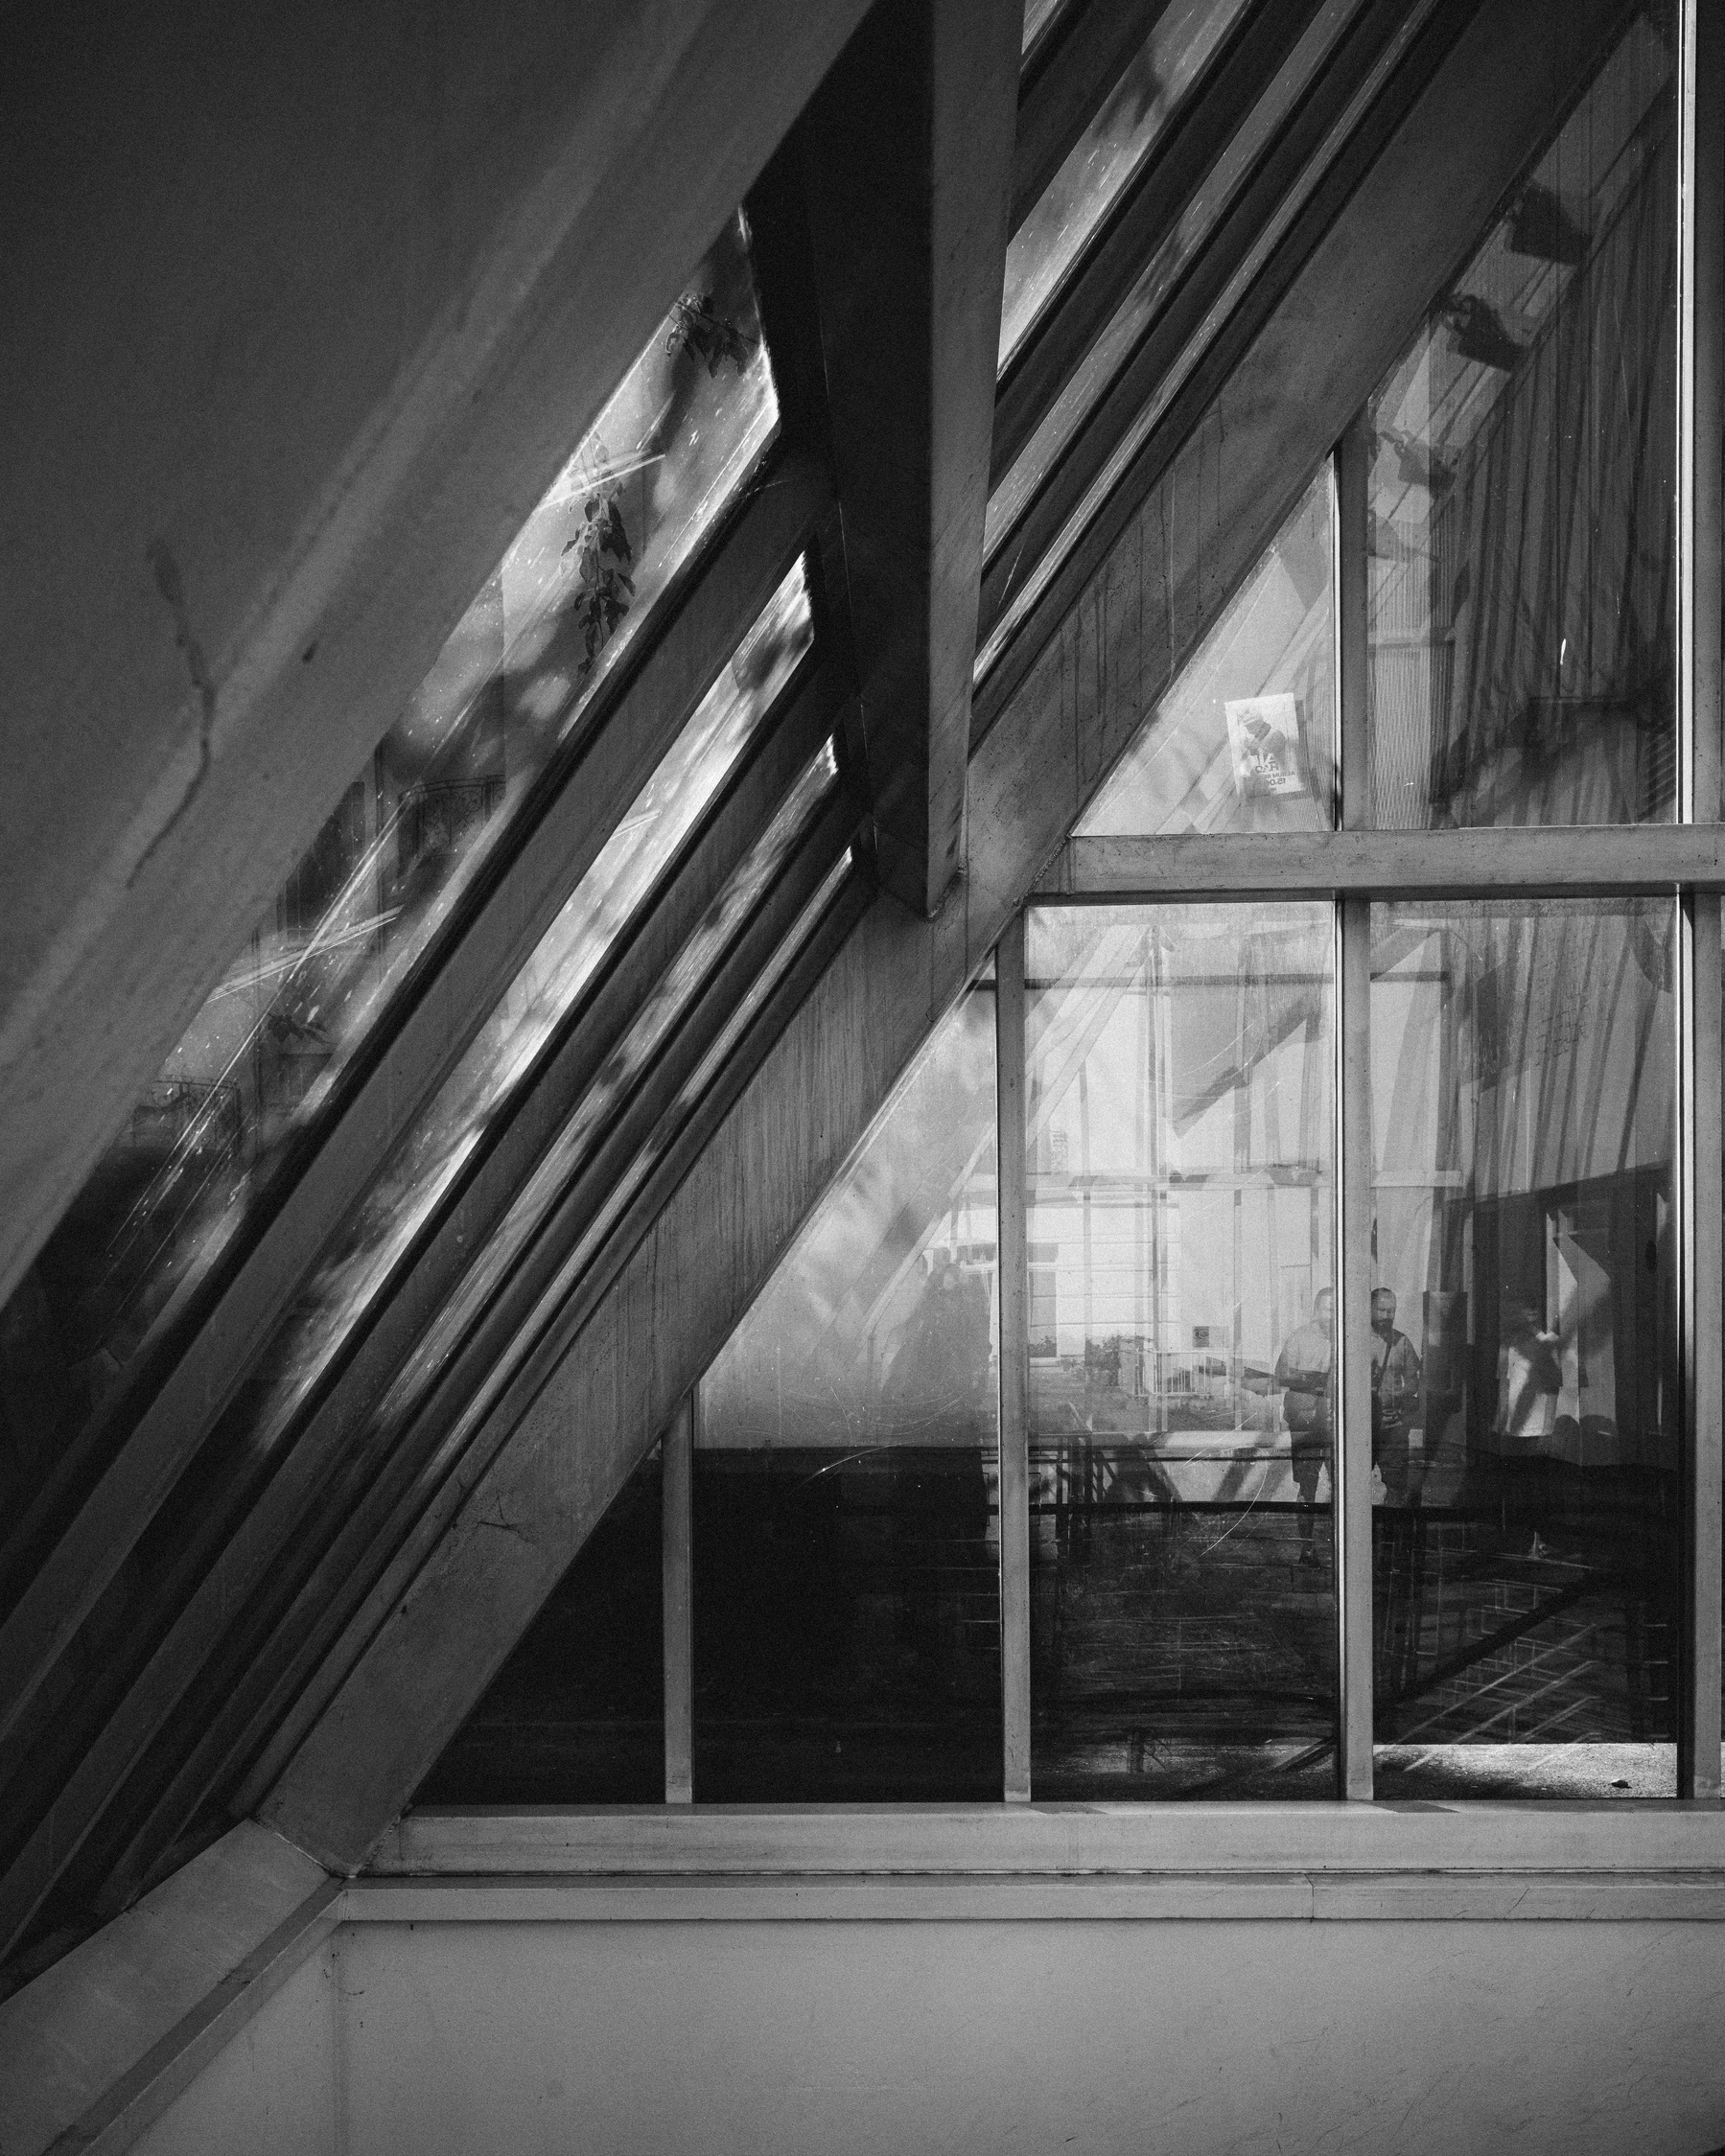 A black and white photograph of an angled window. The primary window runs at an angle from the top right to the bottom left of the frame. The windows are scratched and dirty. Their are many reflections of people walking, other buildings and benches. The window to the left that acts as a roof has patterns caused by the falling of light through trees. It invokes a slightly uncomfortable feeling through the grunginess.